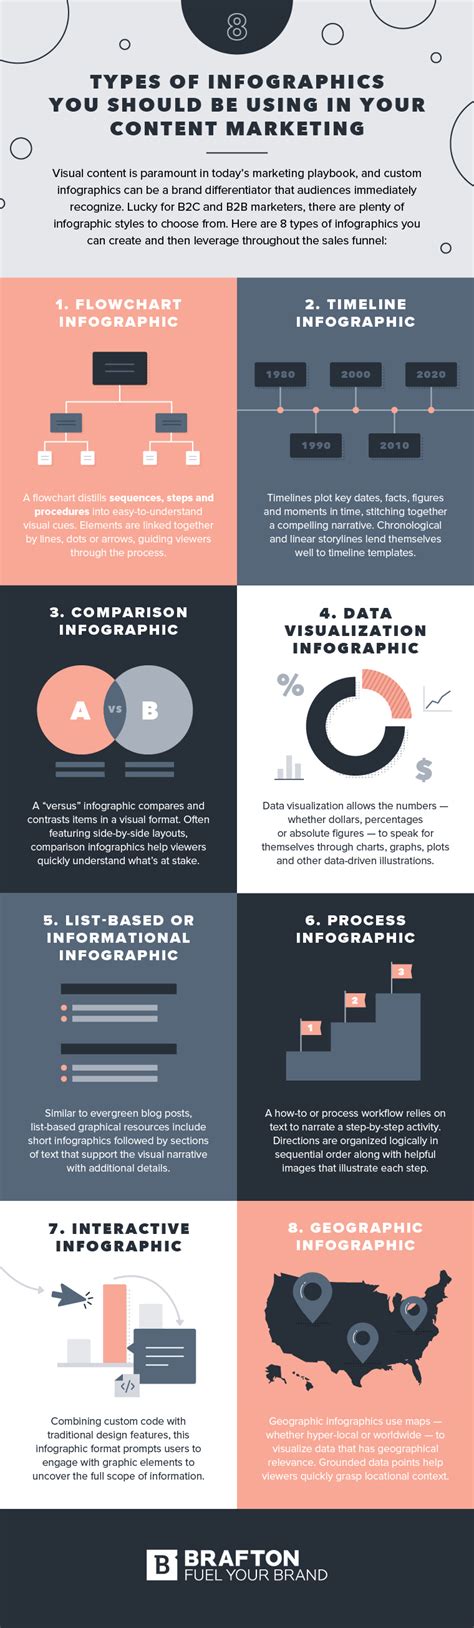 Types Of Infographics You Should Be Using In Your Content Marketing